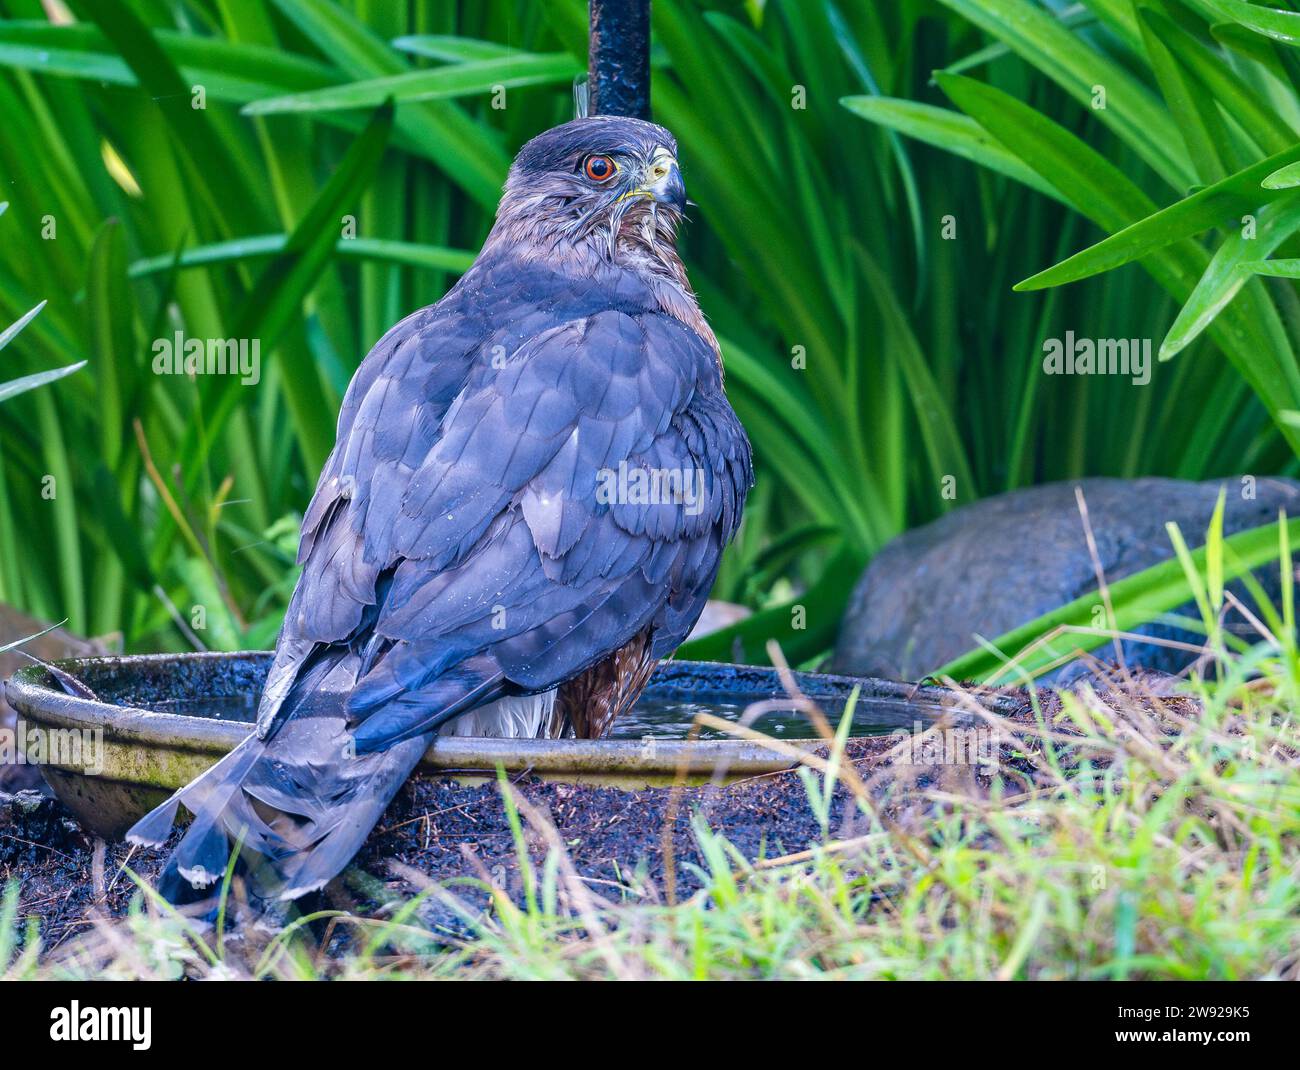 A Cooper's Hawk (Accipiter cooperii) bathing in a water basin. California, USA. Stock Photo